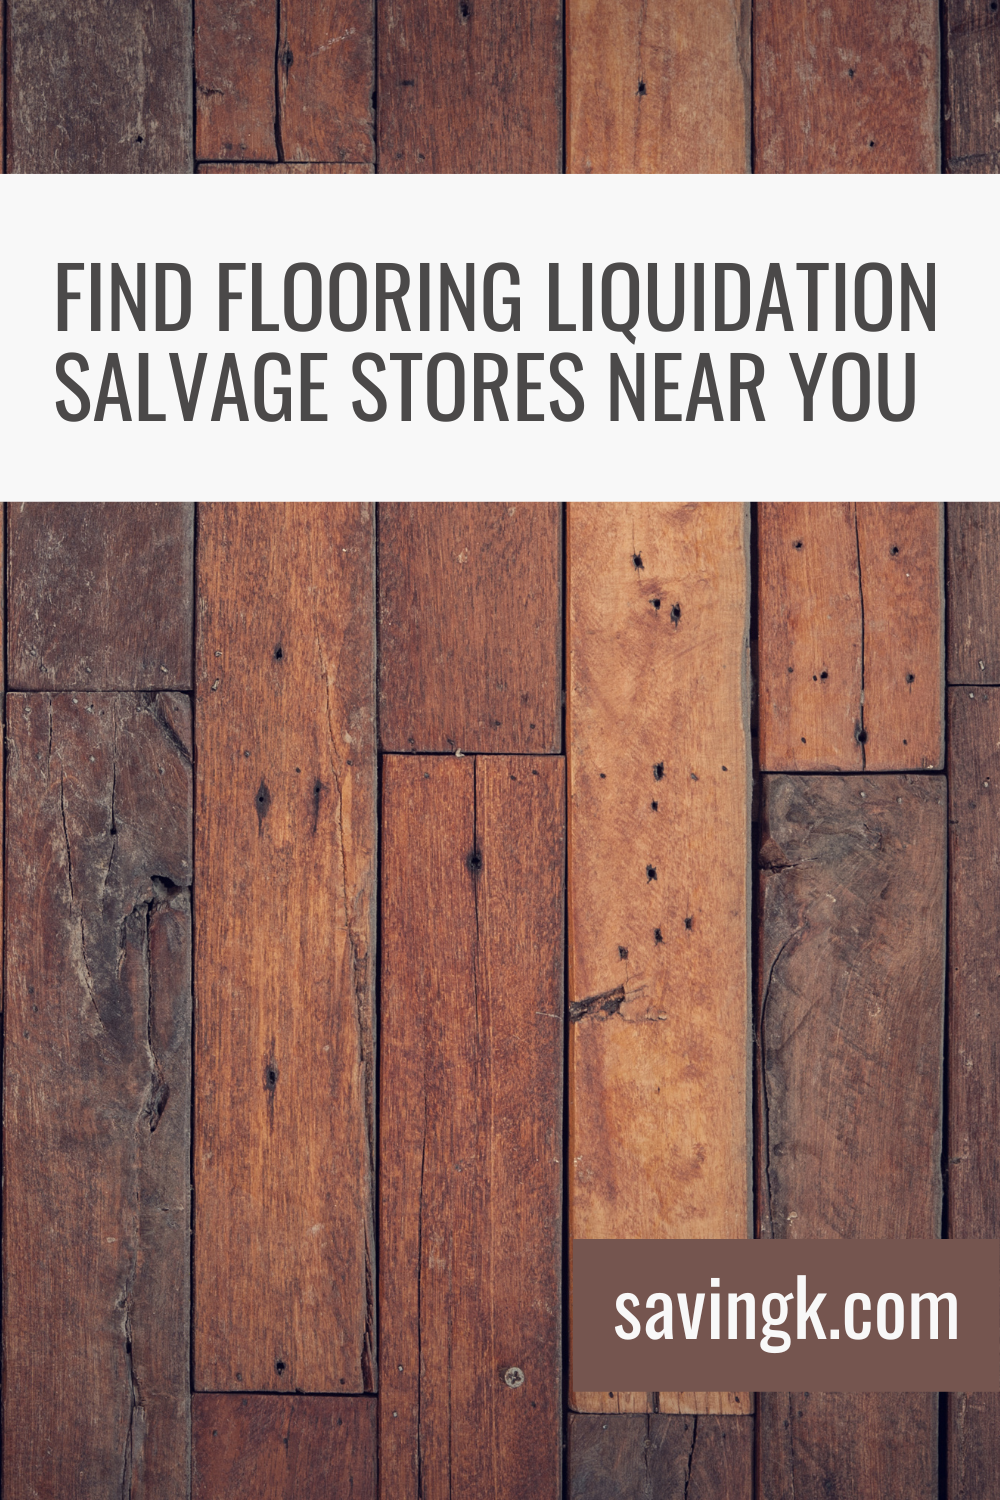 All About Flooring Liquidation Salvage Stores Near You